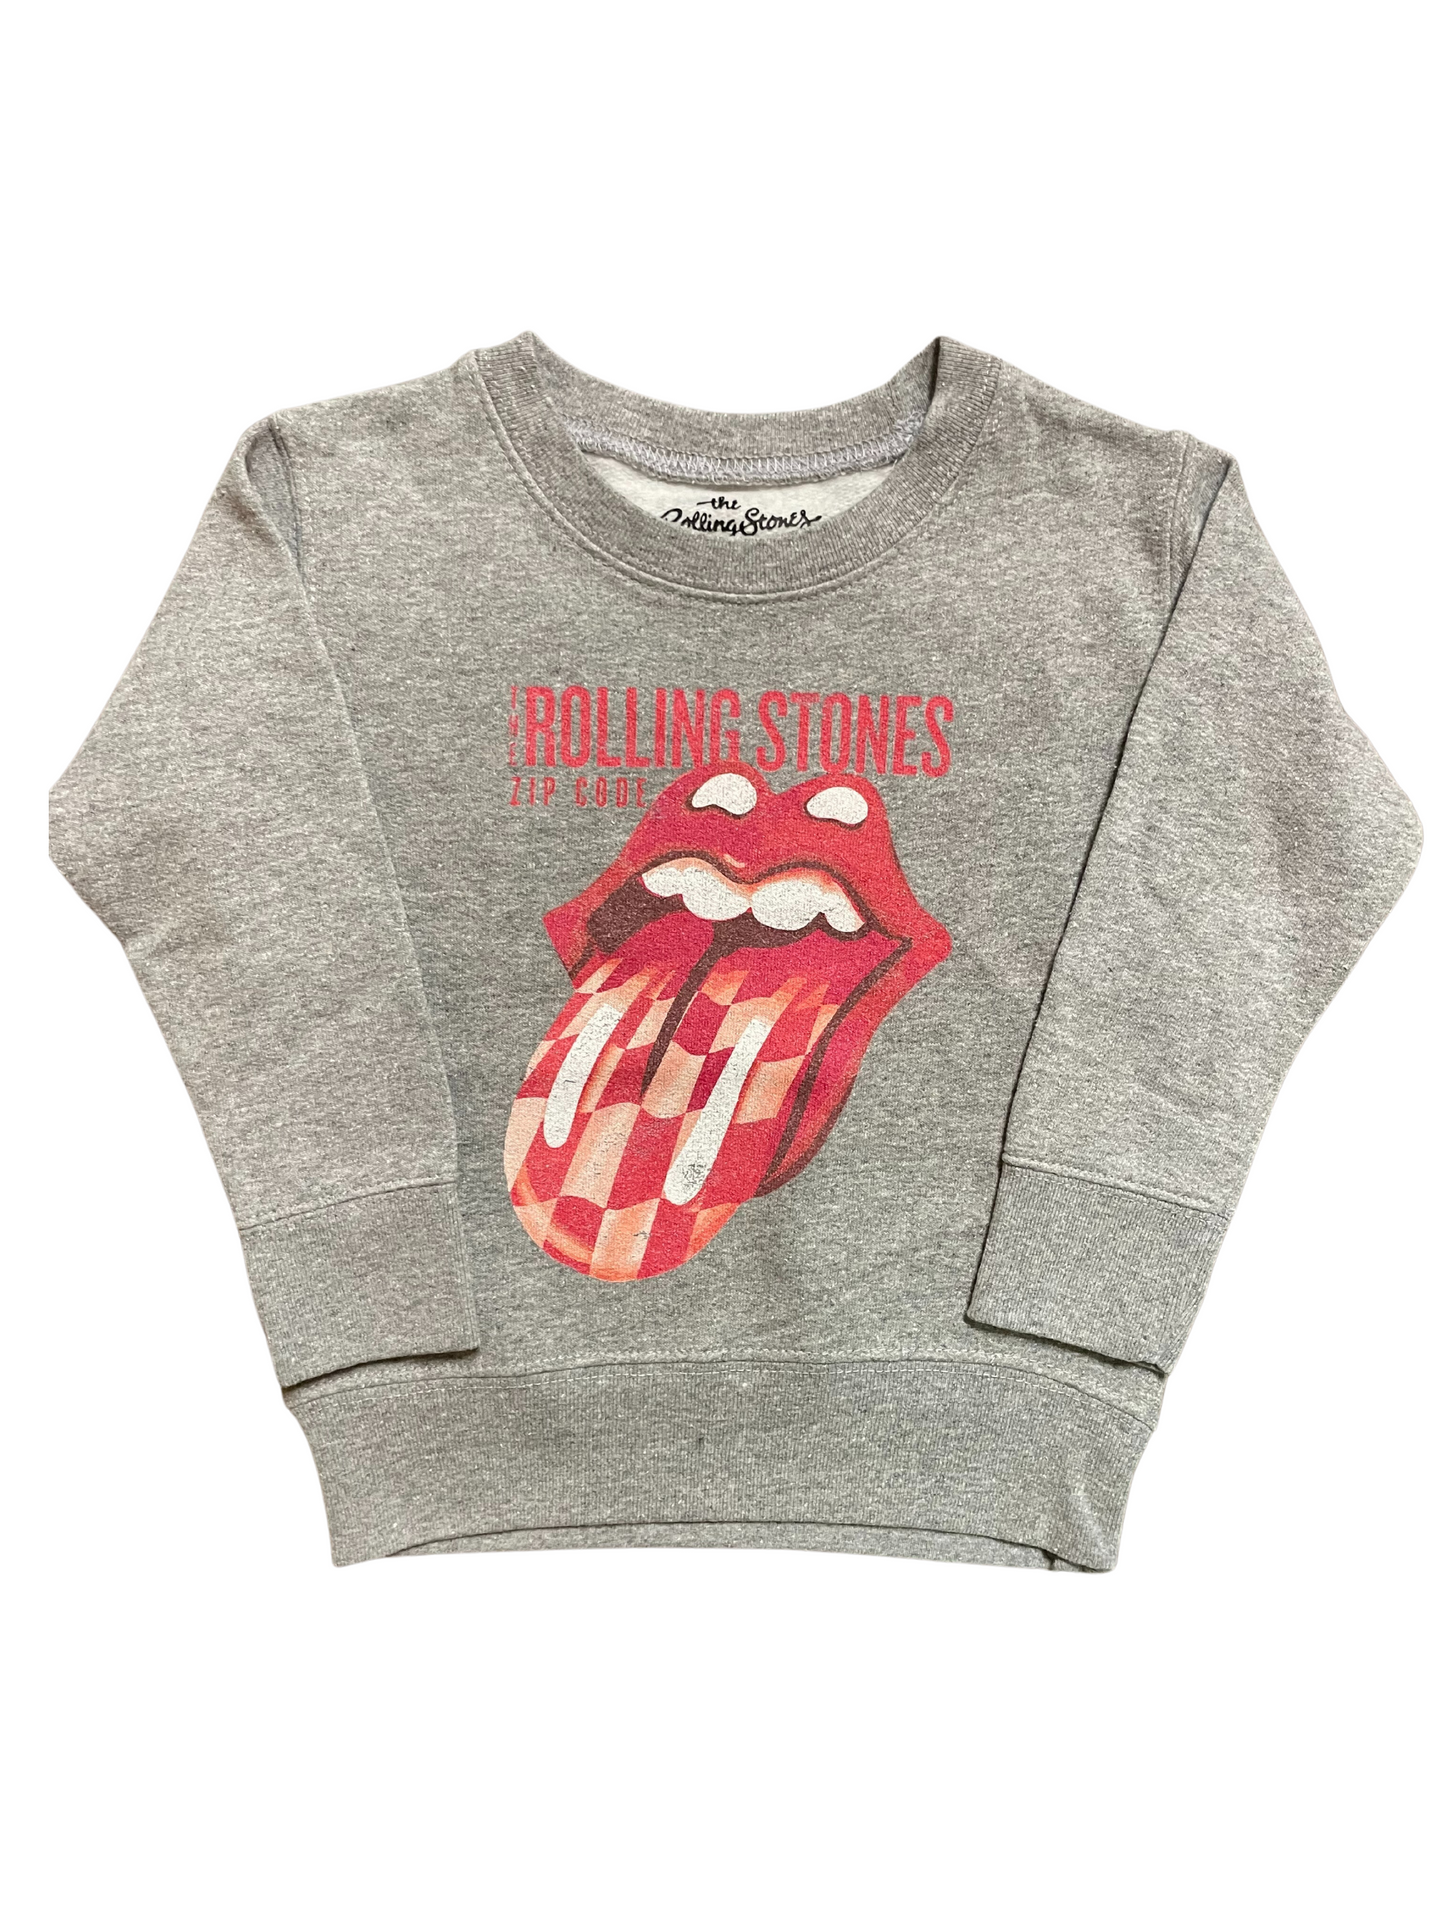 KIDS ROLLING STONE CREW - THE LITTLE EAGLE BOUTIQUE